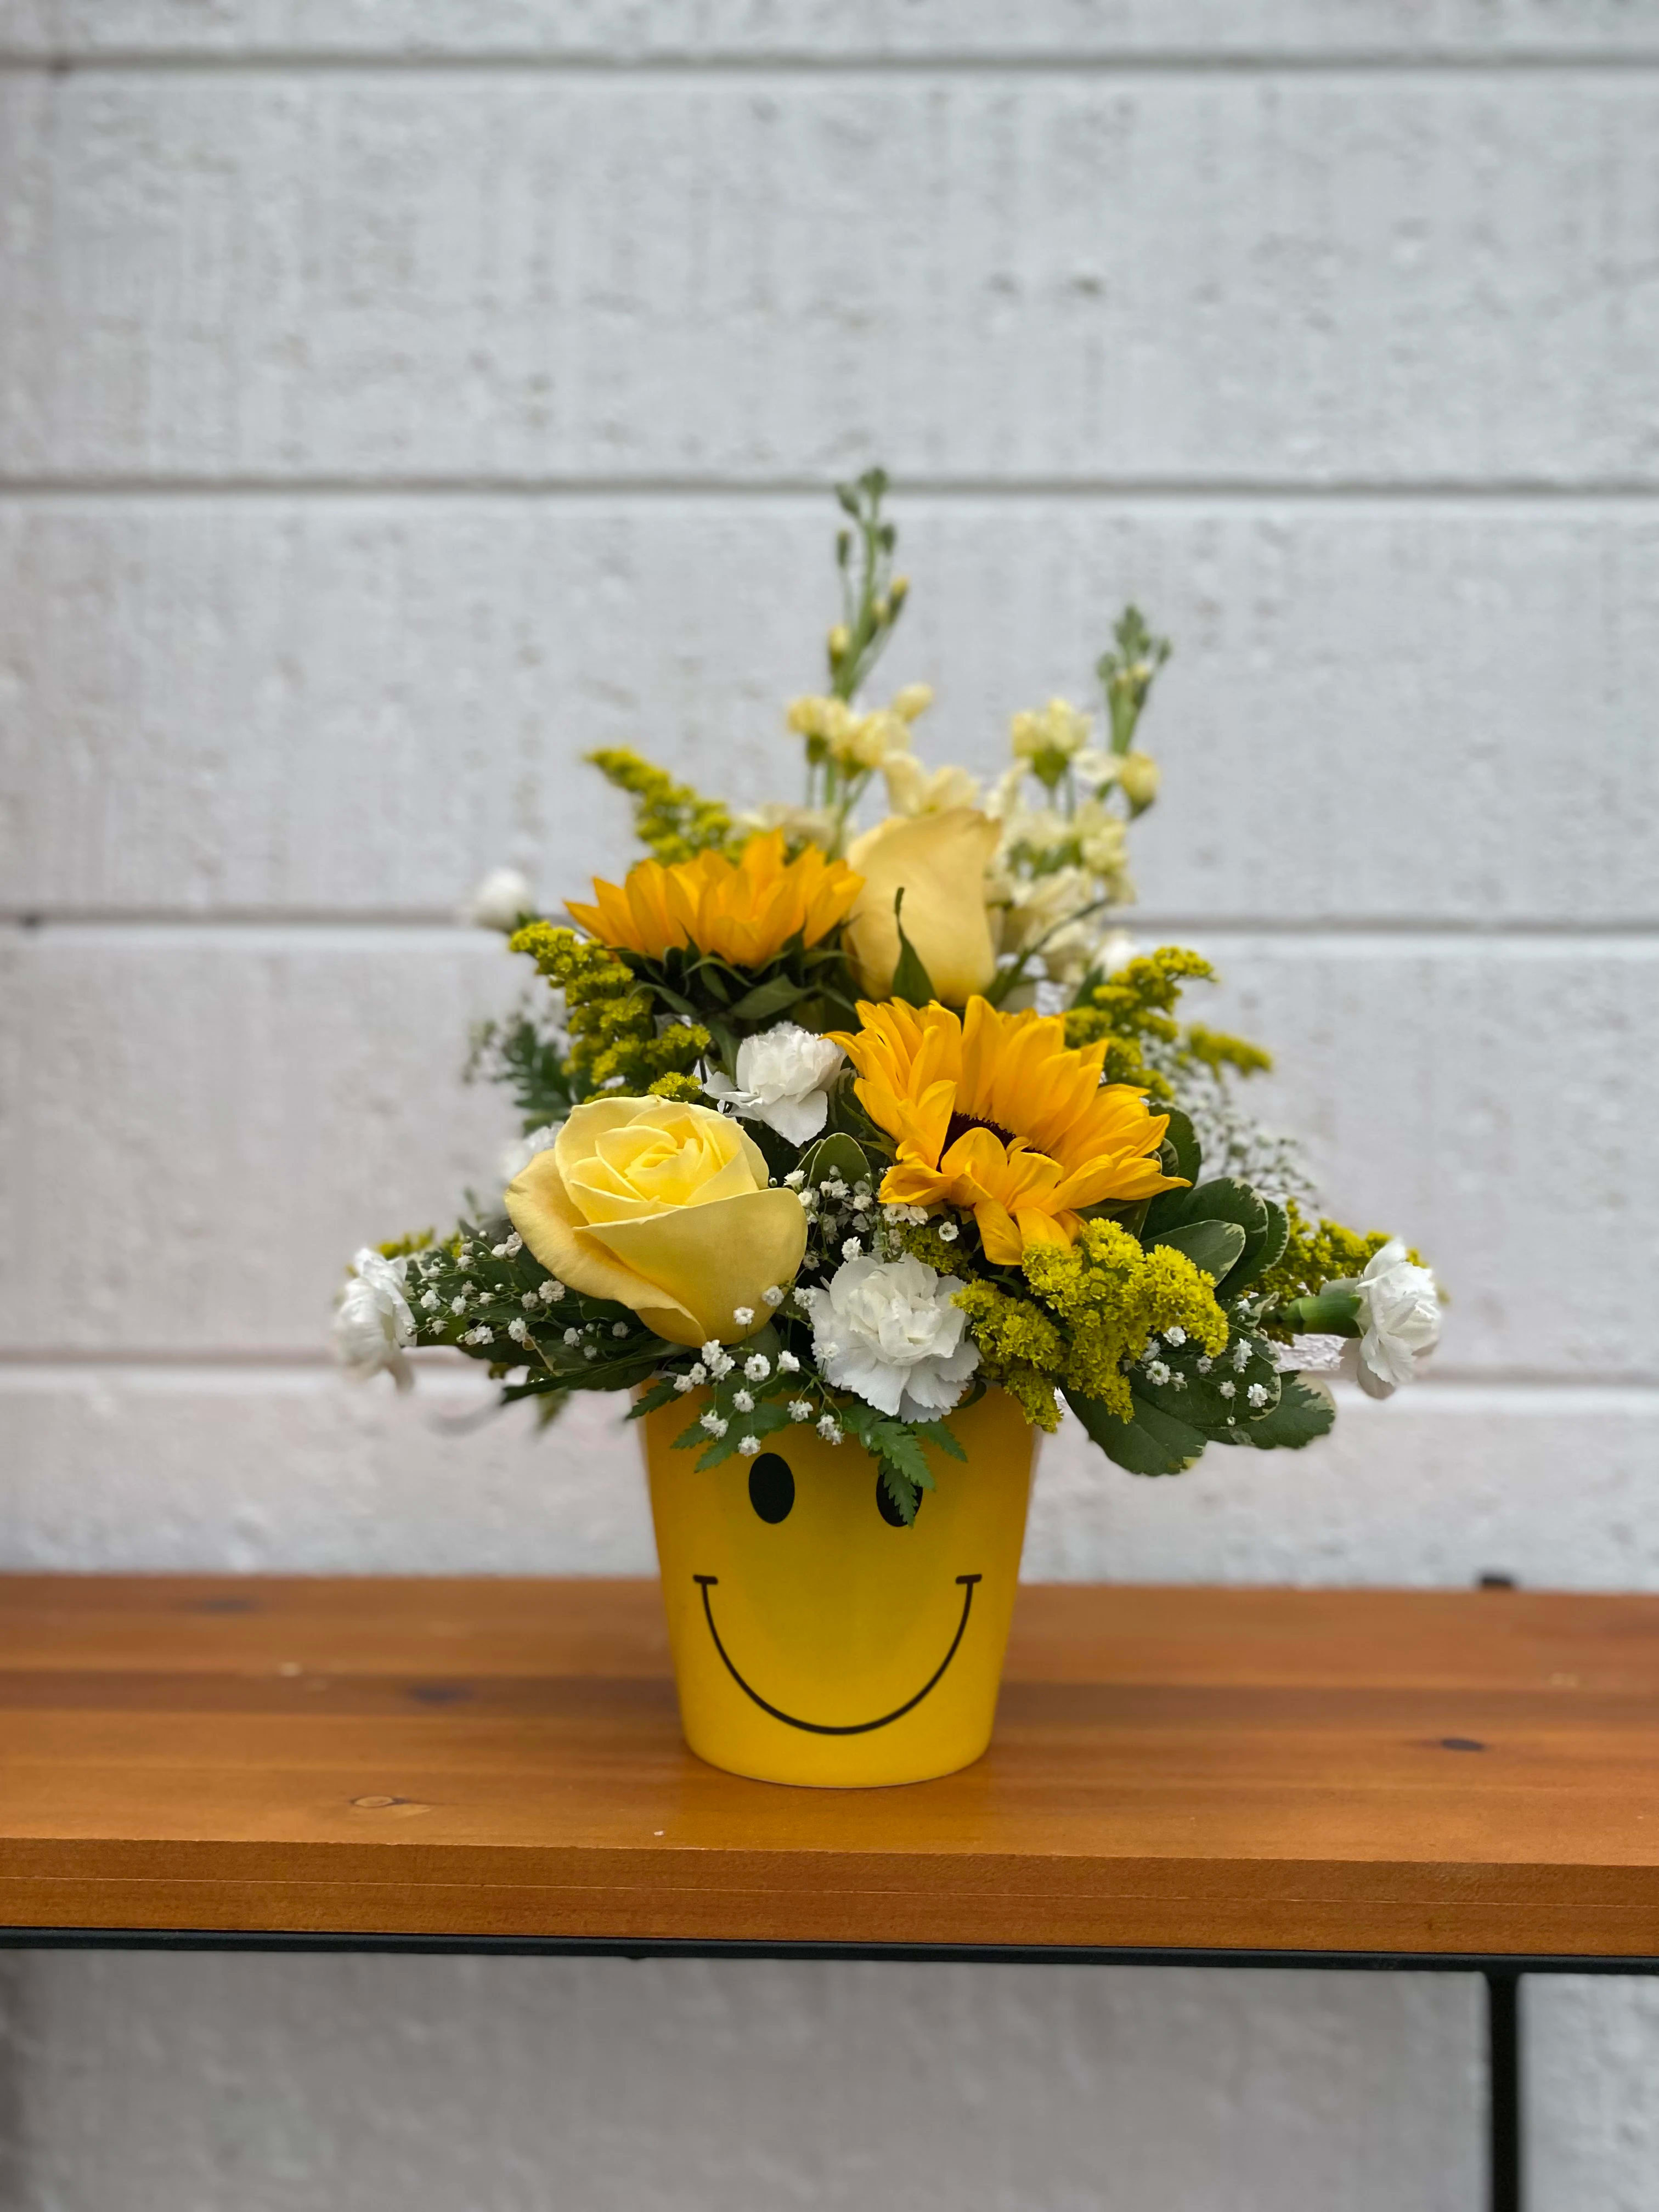 Miles of Smiles - A cheery mix of bright, colorful flowers in a Smiley Container! Just the floral arrangement to put a smile on someone's face!